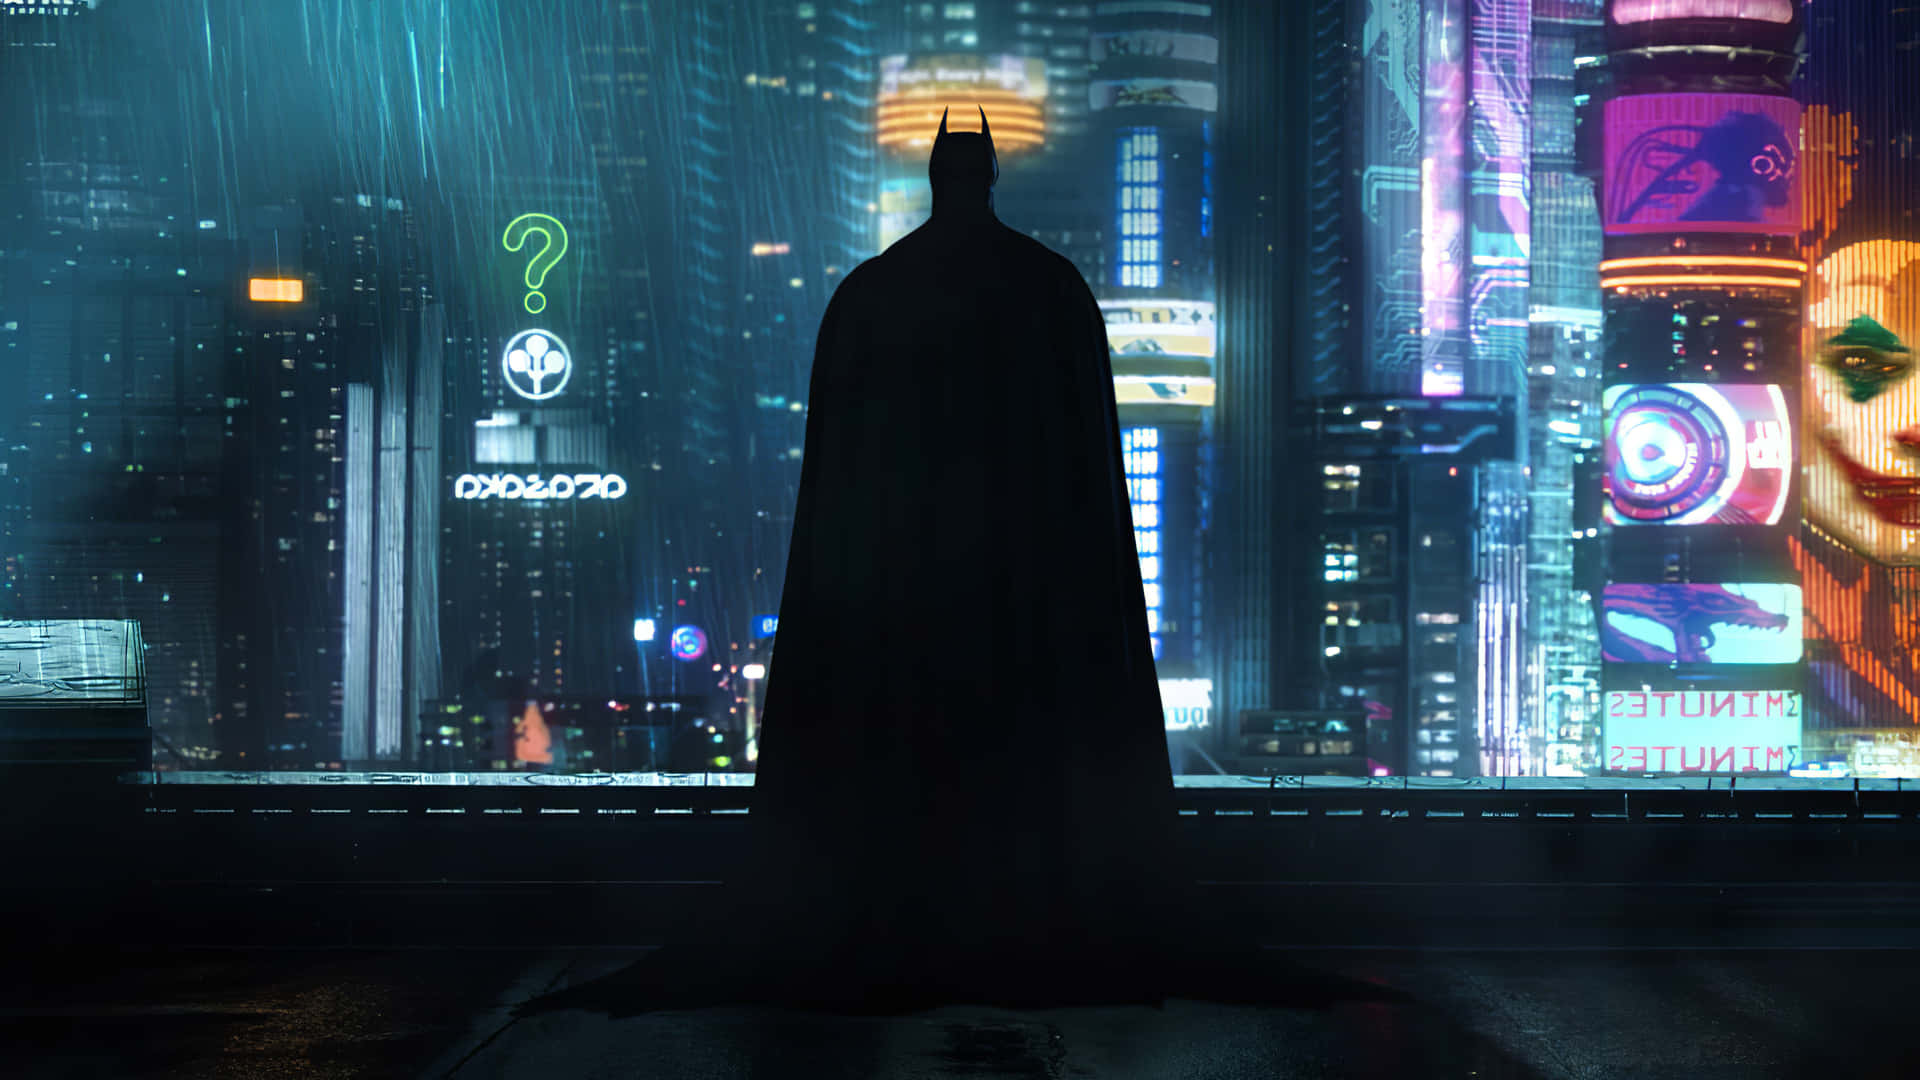 "A view of Gotham City after a late night rainfall" Wallpaper